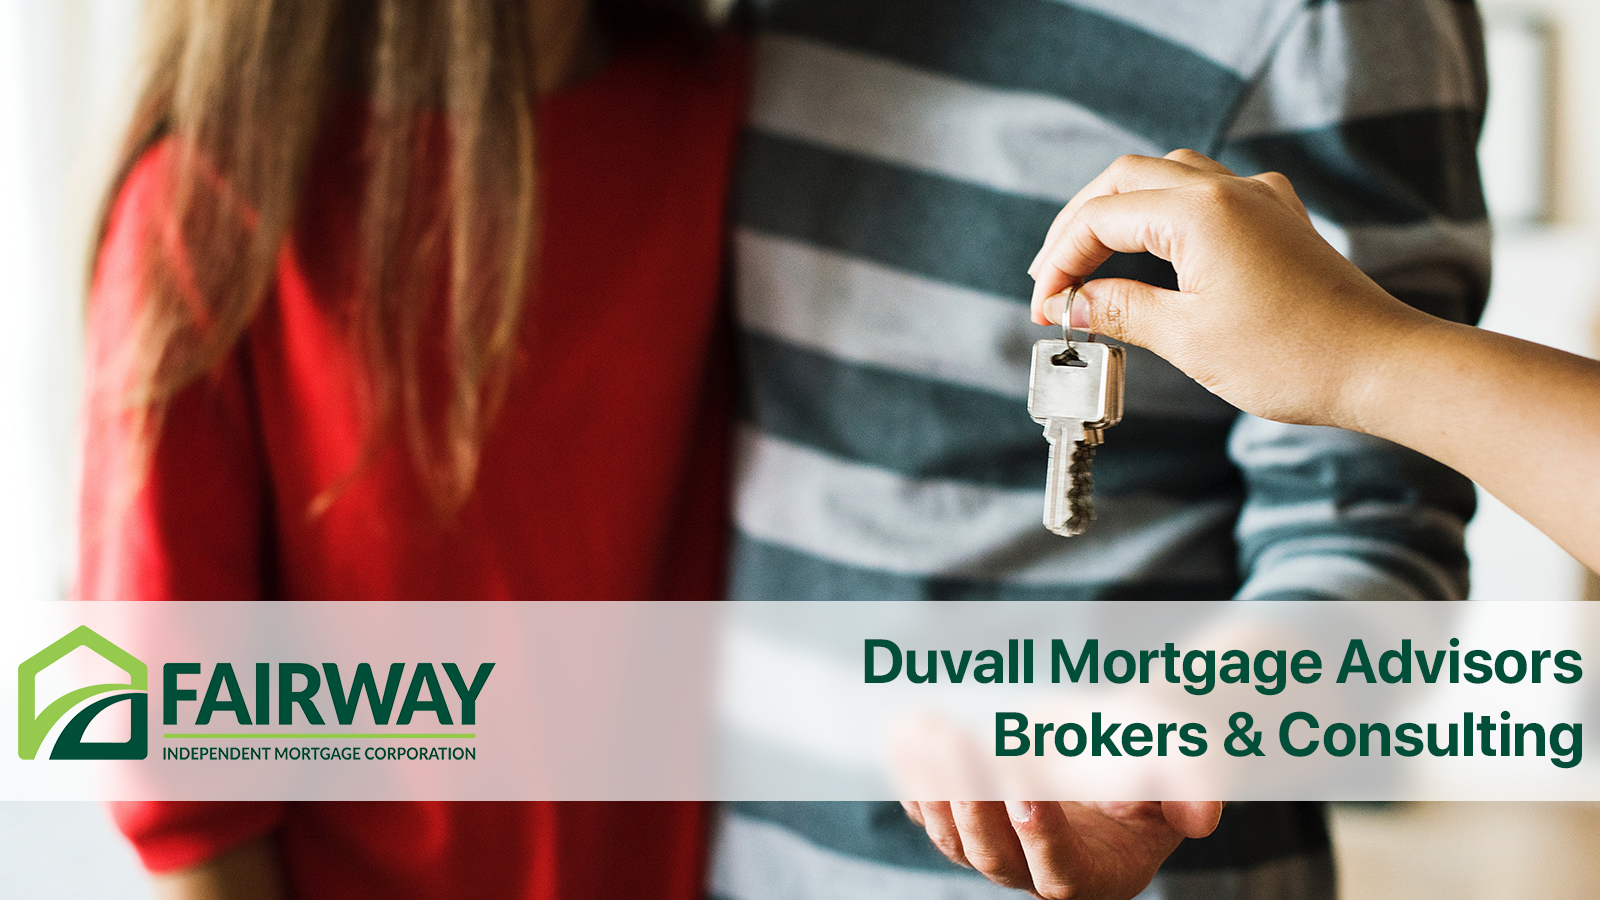 Duvall-Mortgage-Advisors-Brokers-Consulting